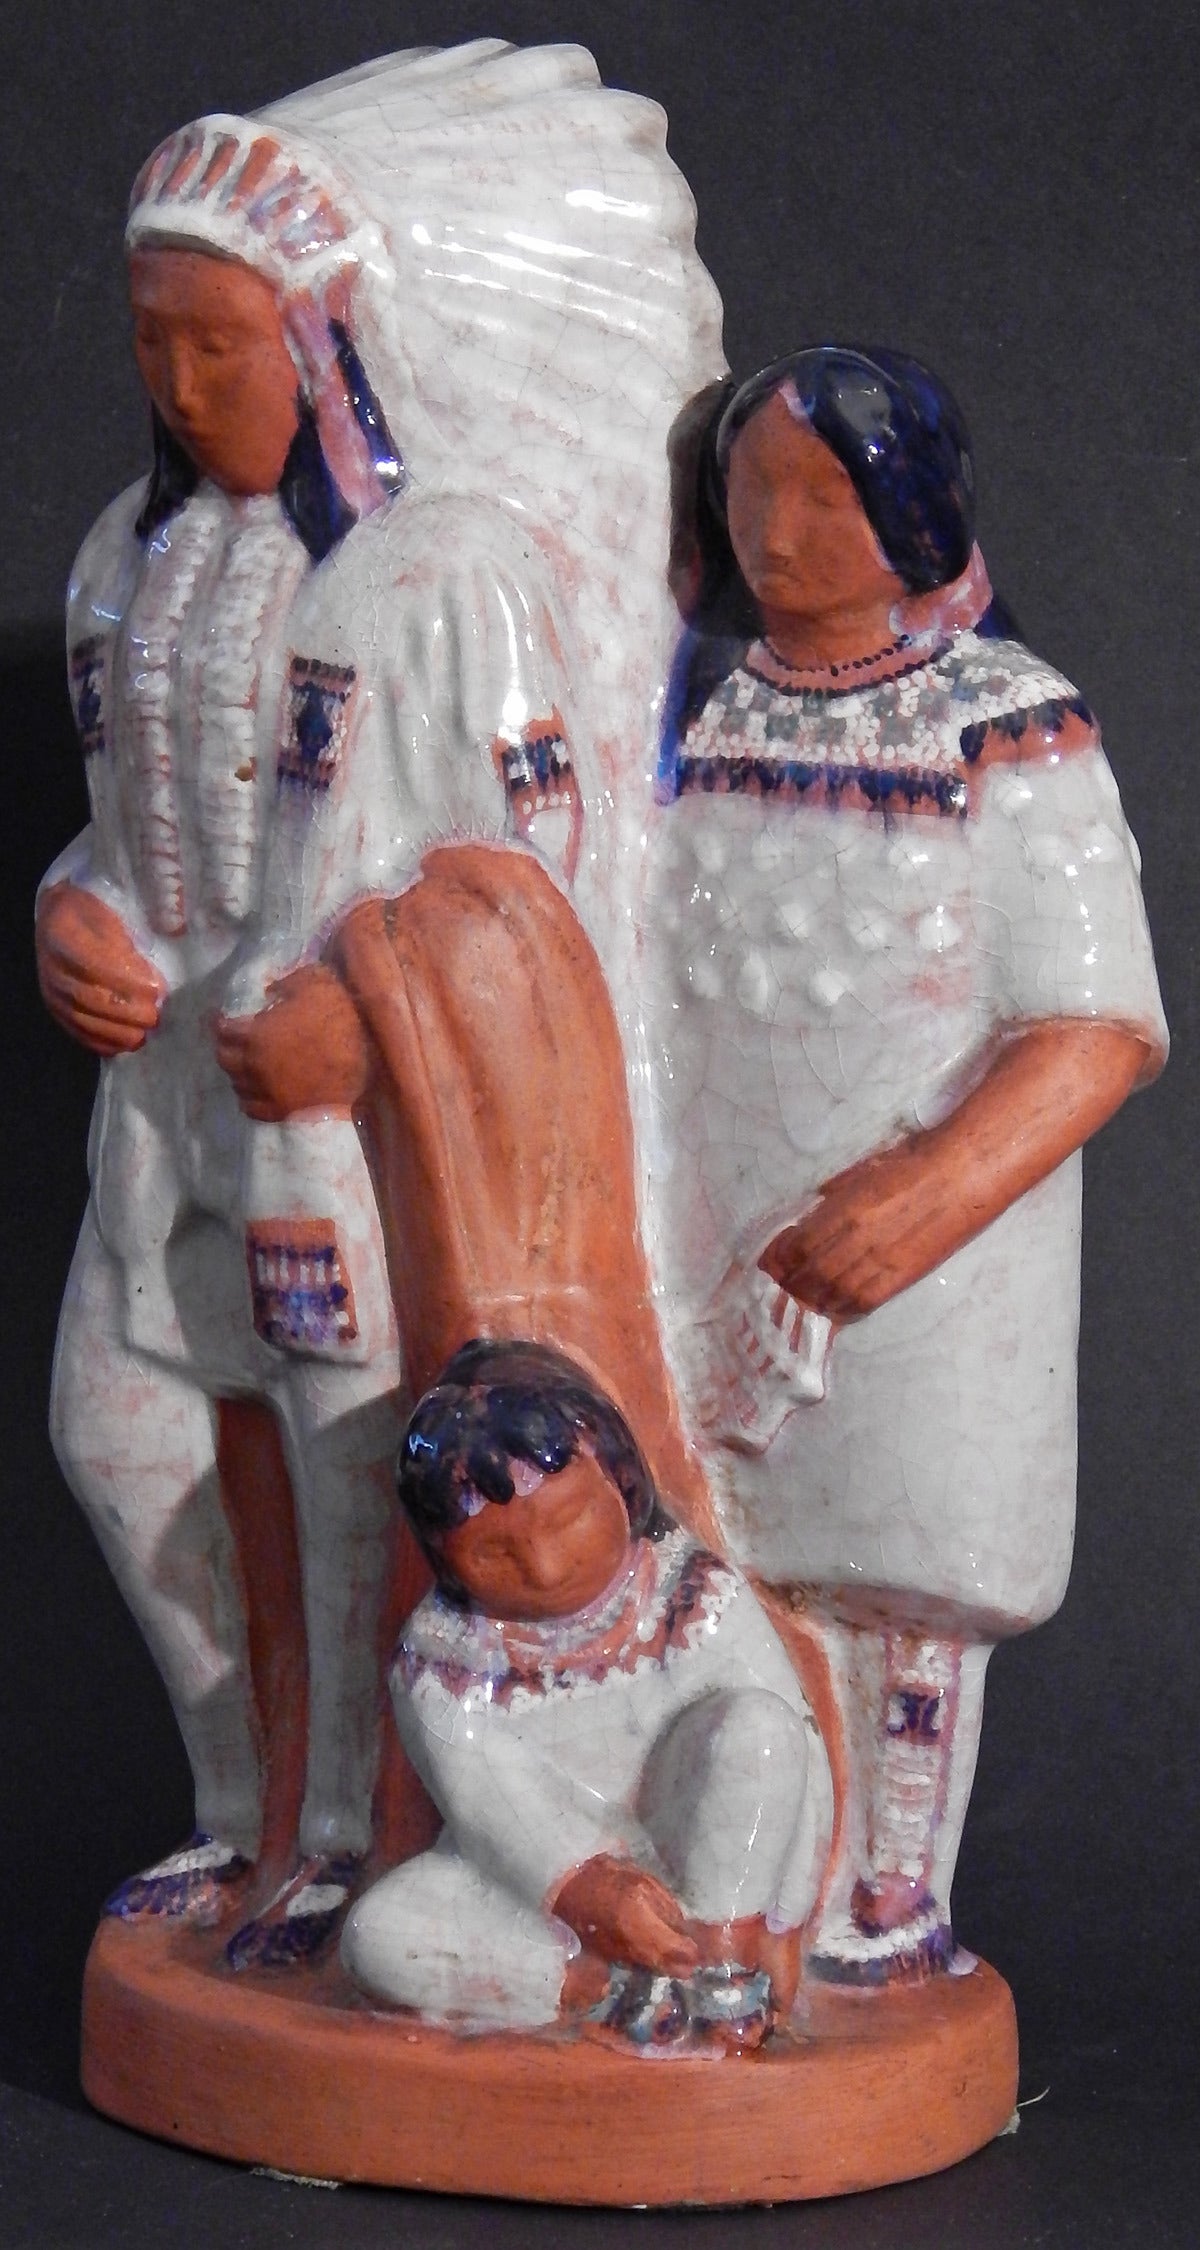 This remarkable ceramic sculpture, probably the best work of Elisabeth Andersen Seaver, one of the famous Cleveland School ceramicists -- depicts an Indian chief with full feather headdress, with his wife and child, all in snowy-white dress. Seaver